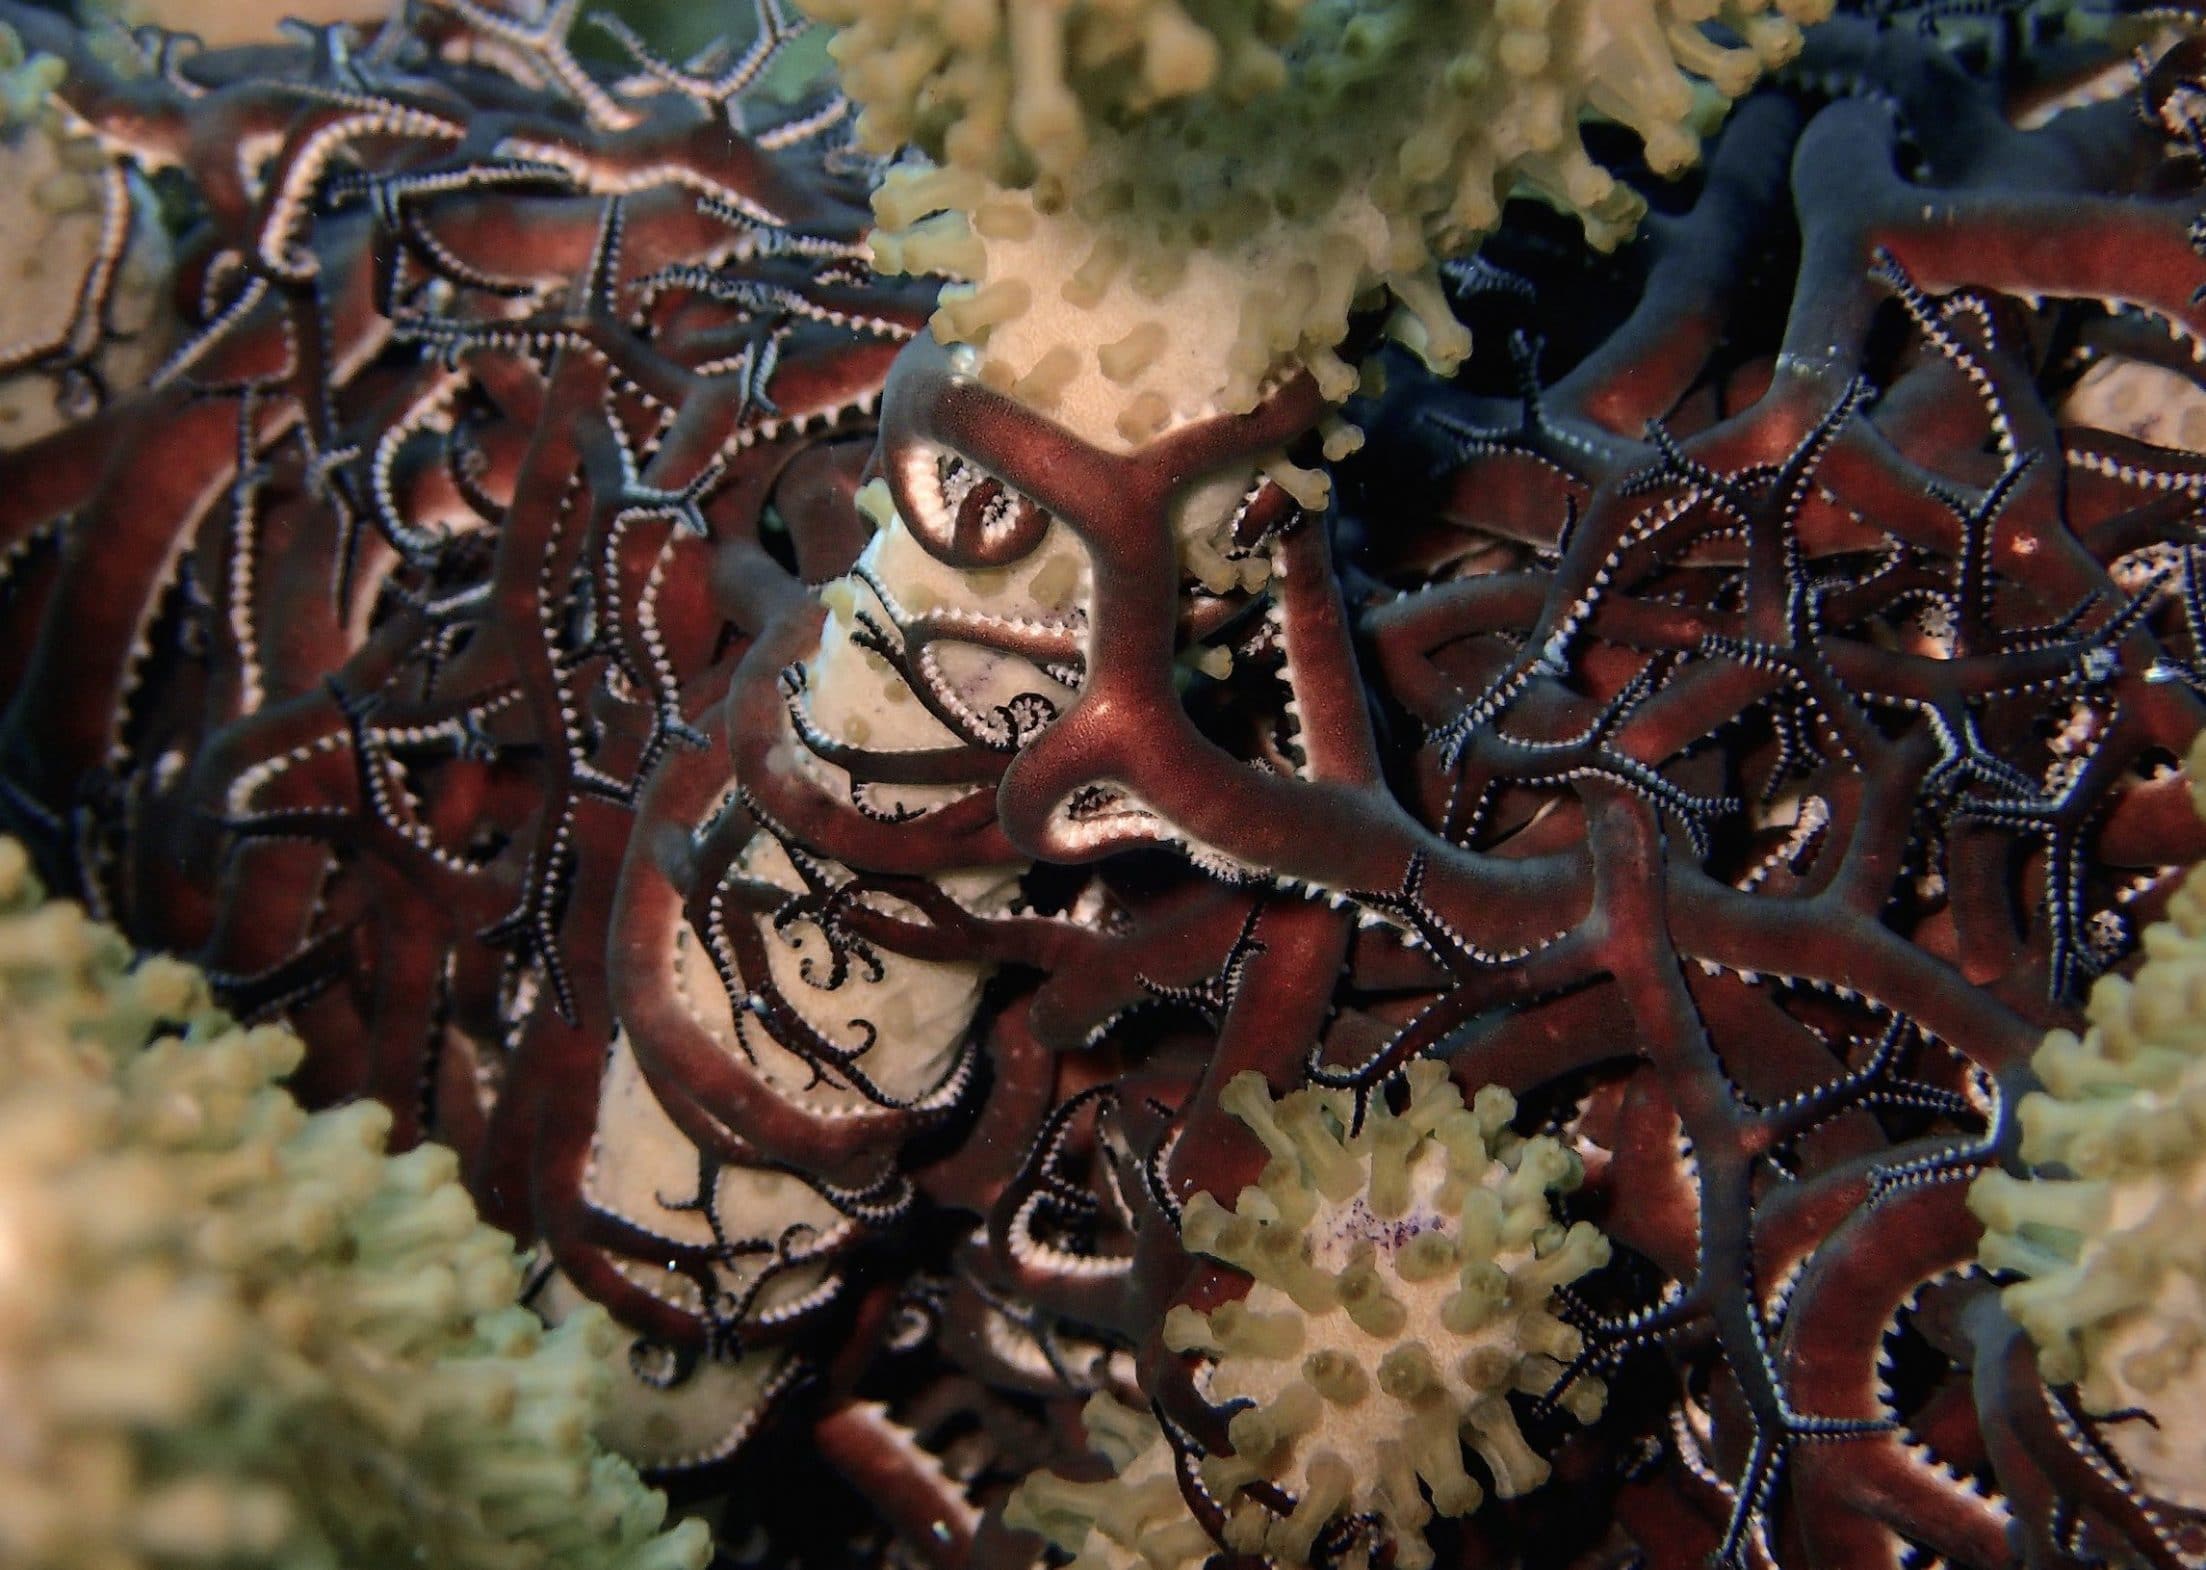 You are currently viewing Cozumel Marine Life: Sea Stars and Starfish